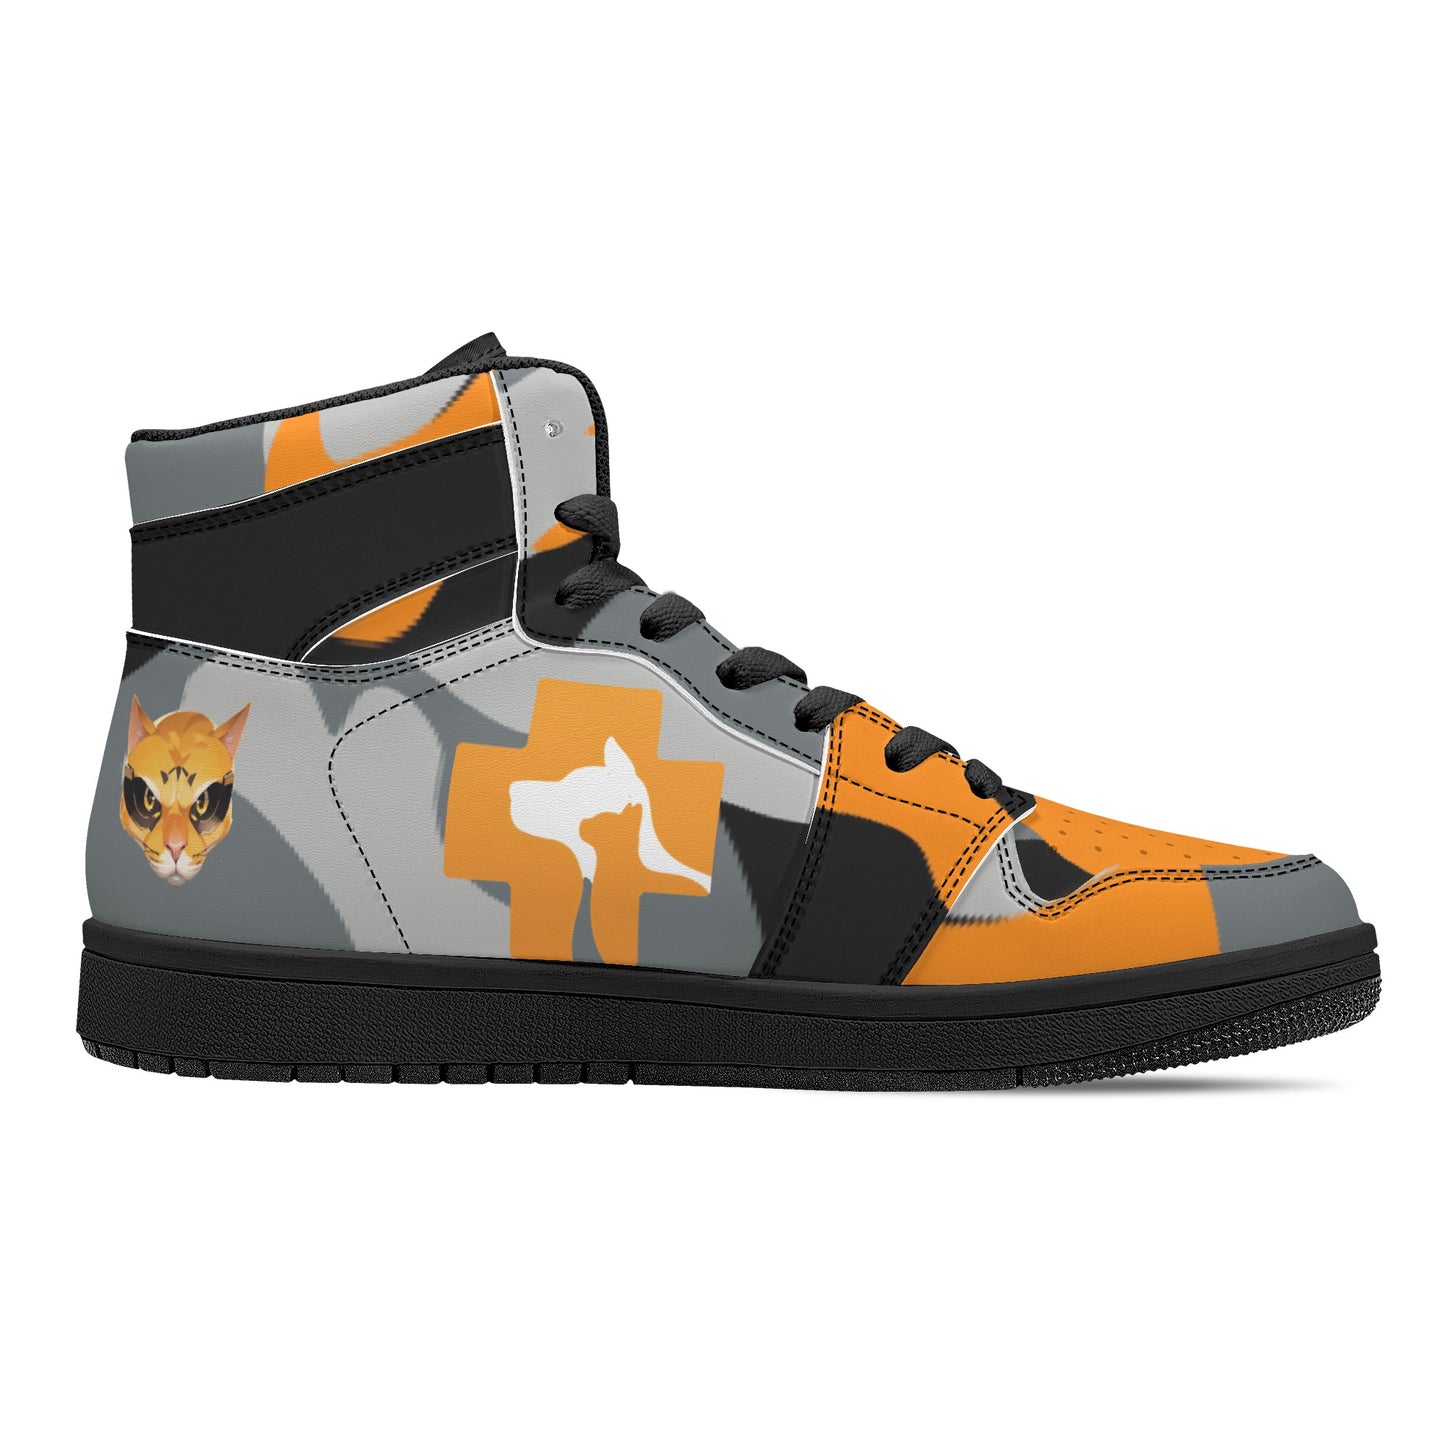 Stand out  with the  Nugget Army Vet Womens Black High Top Leather Sneakers  available at Hey Nugget. Grab yours today!